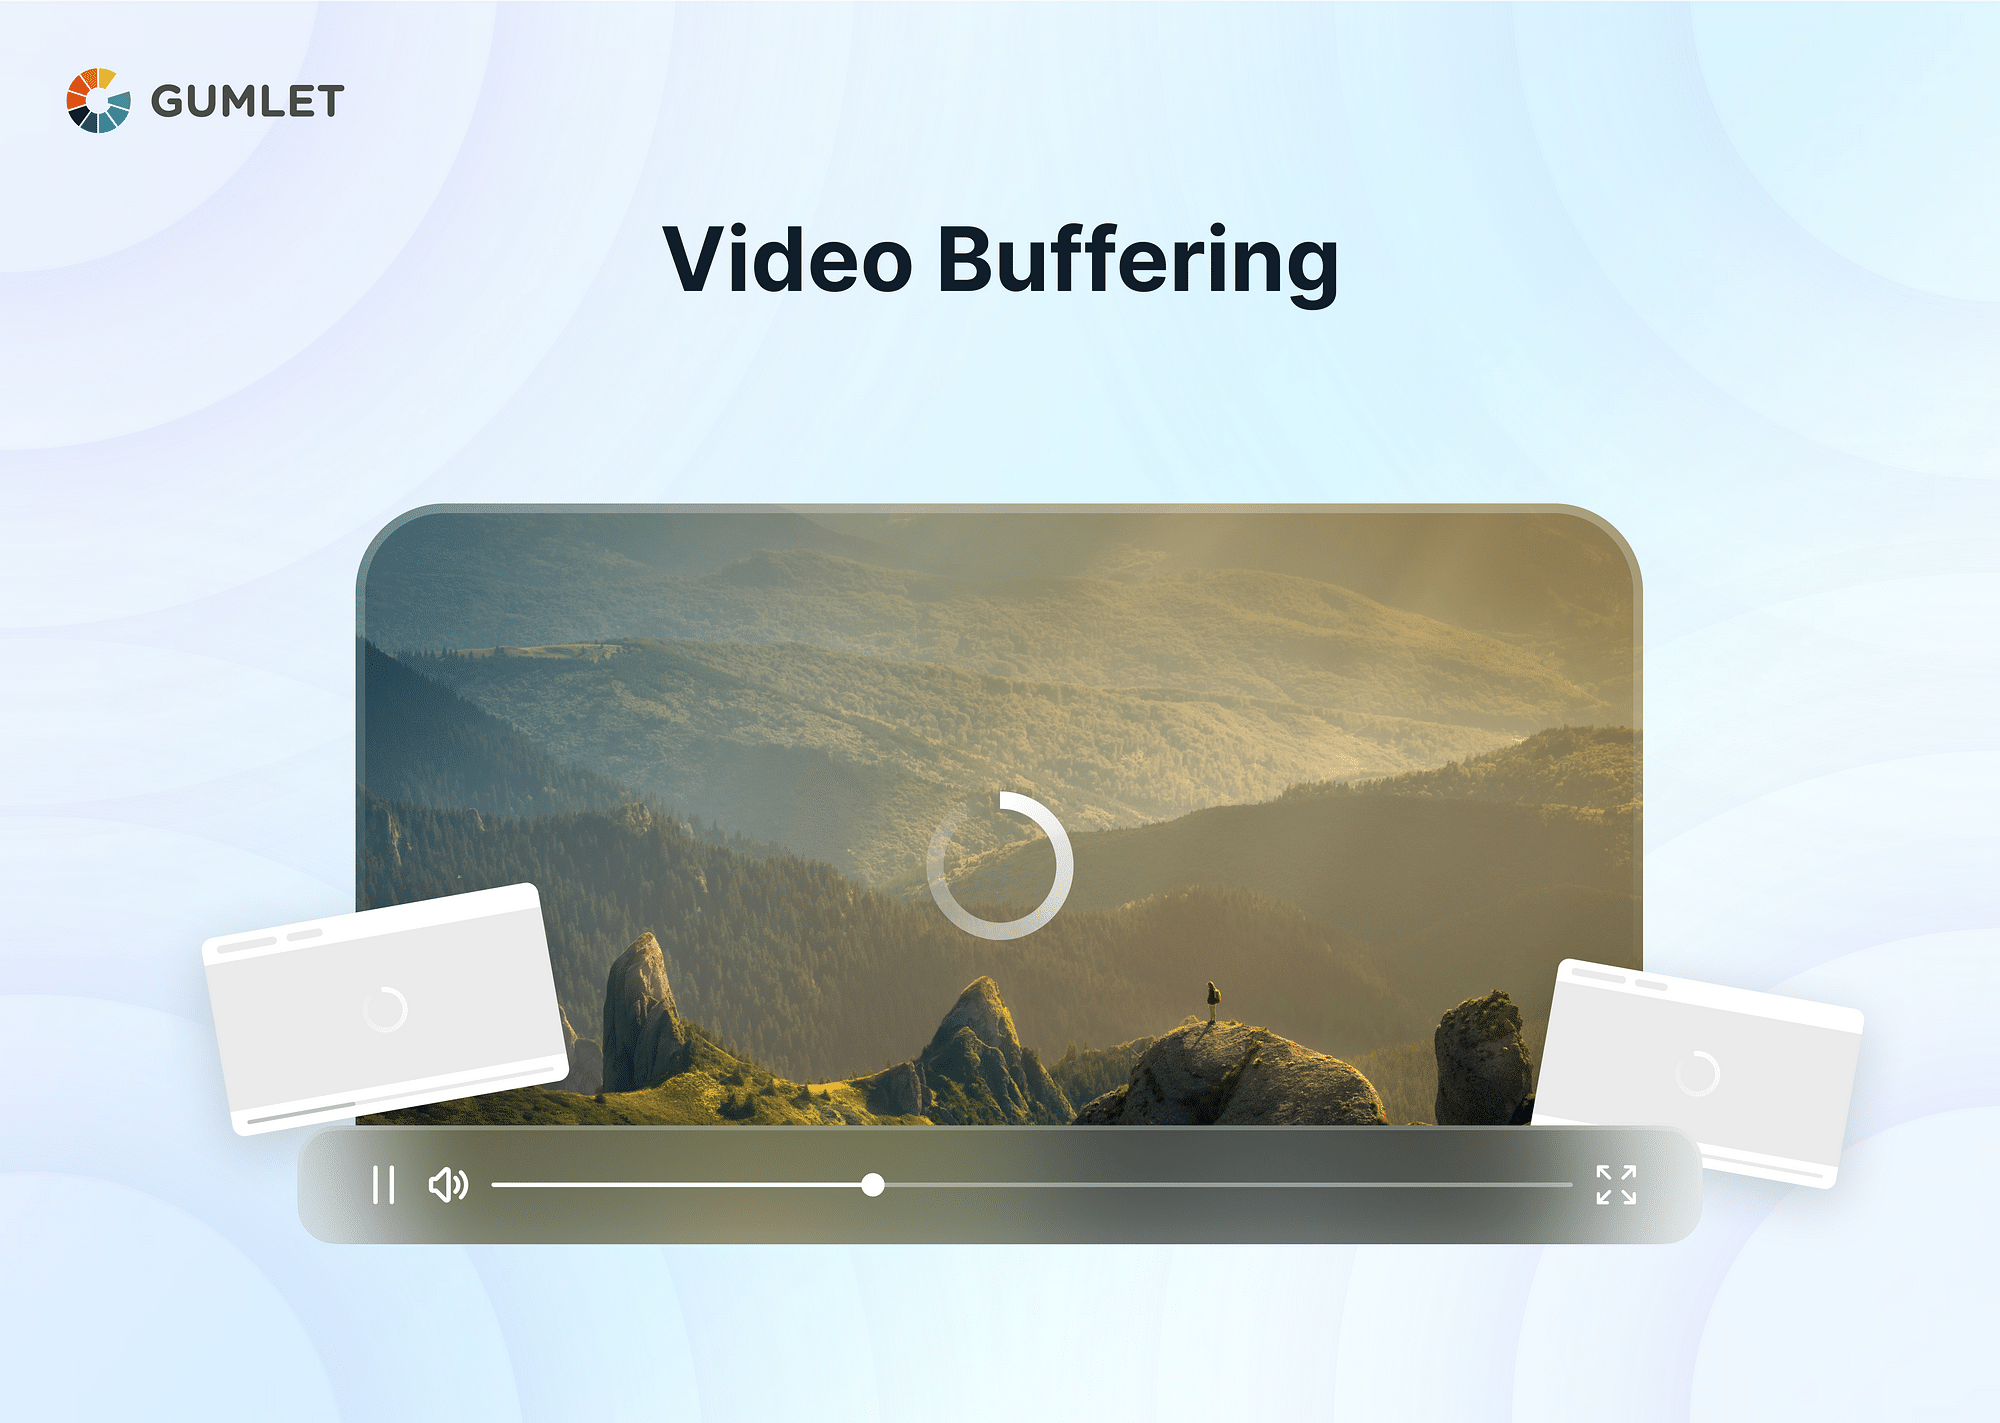 Step-by-Step Guide: How to Embed a  Video? - Gumlet